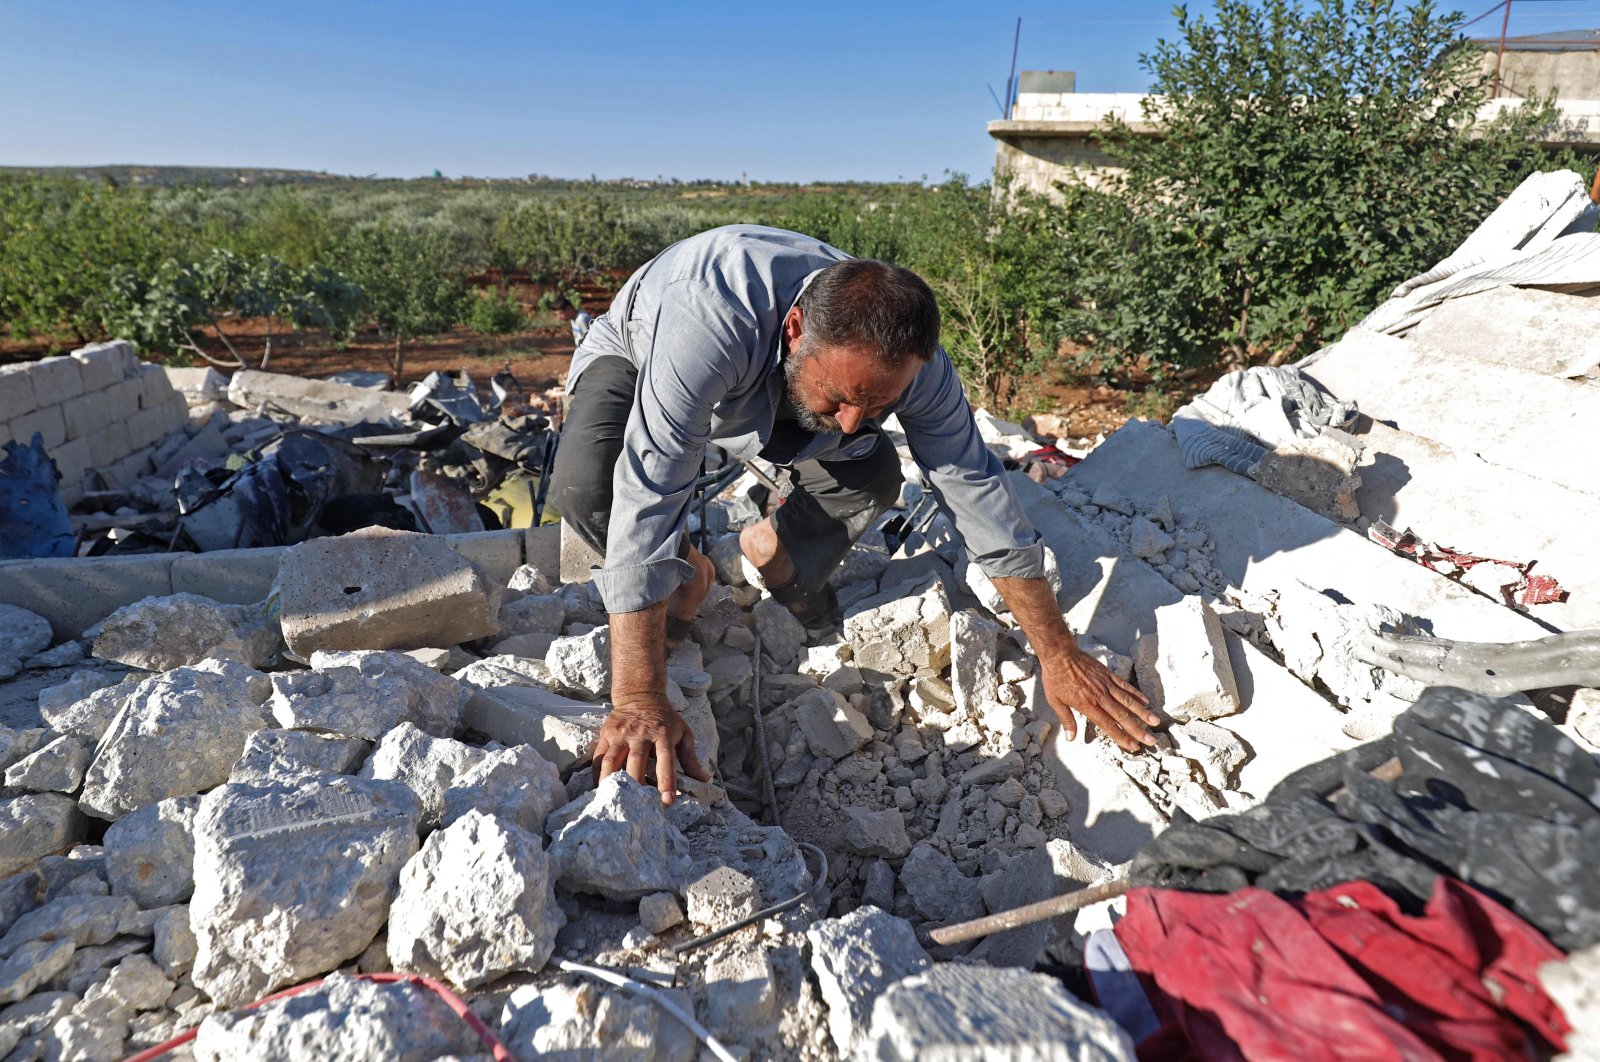 A man searches through rubble in the aftermath of Syrian regime forces' bombardment on the town of Balashun, south of Idlib province, Syria, on Aug. 19, 2021. (AFP Photo)